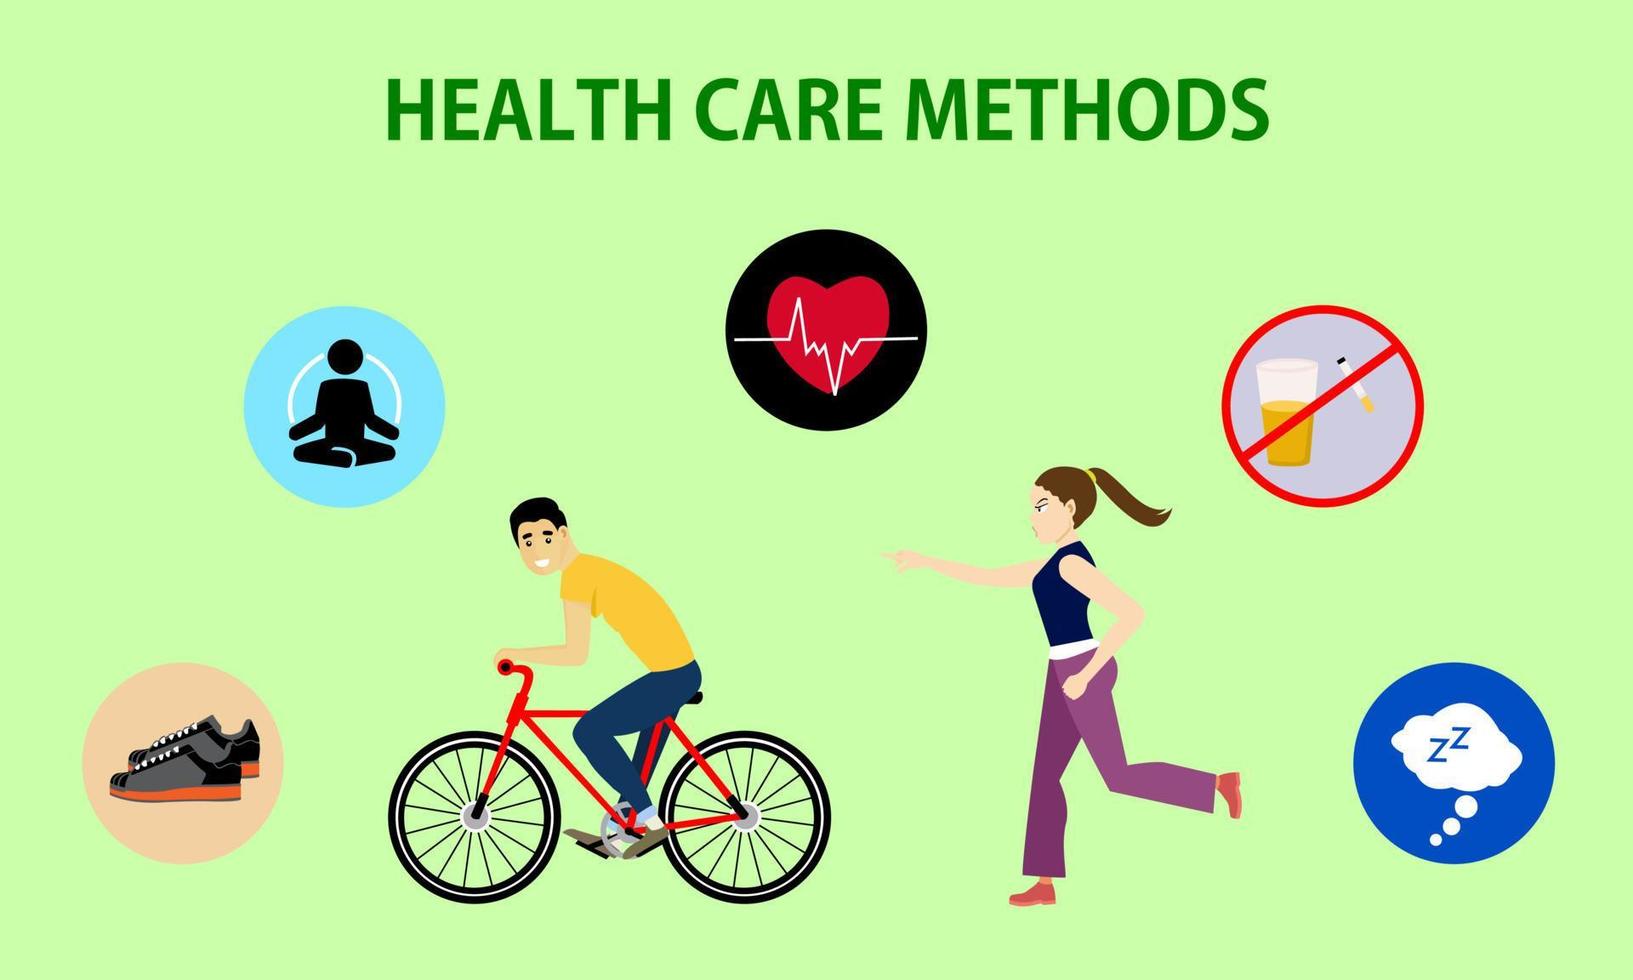 Health care methods. Cycling and running. Exercise,meditate,pulse,normal heartbeat,don't drink,don't smoke,sleep well. vector